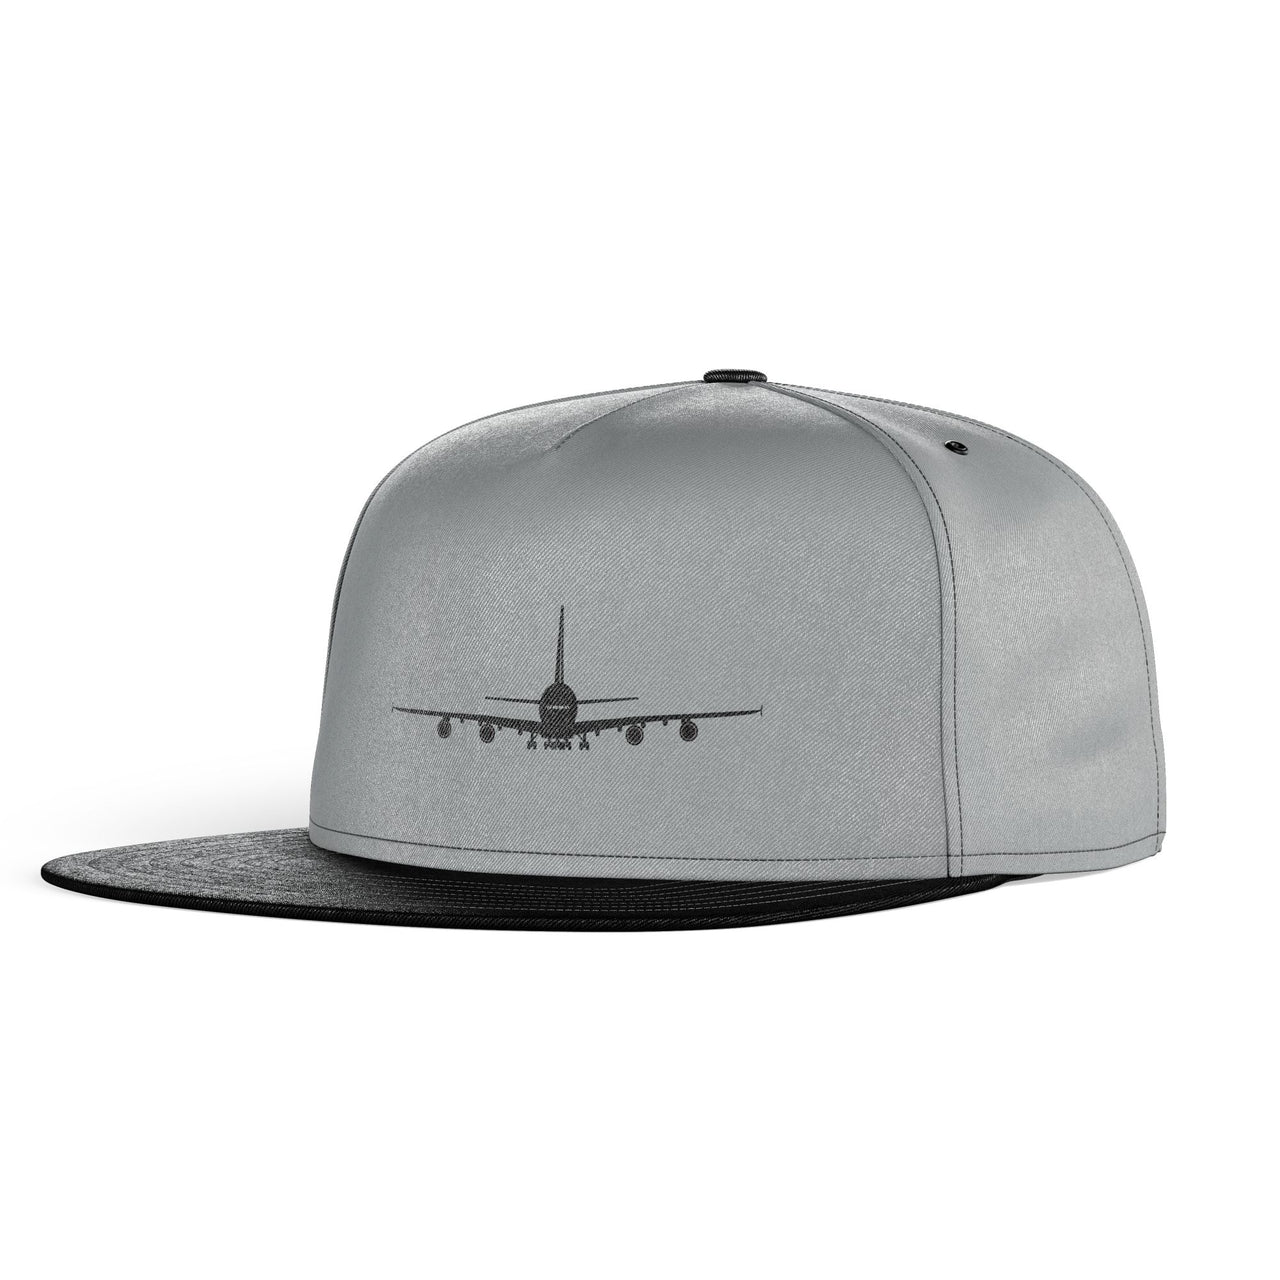 Airbus A380 Silhouette Designed Snapback Caps & Hats